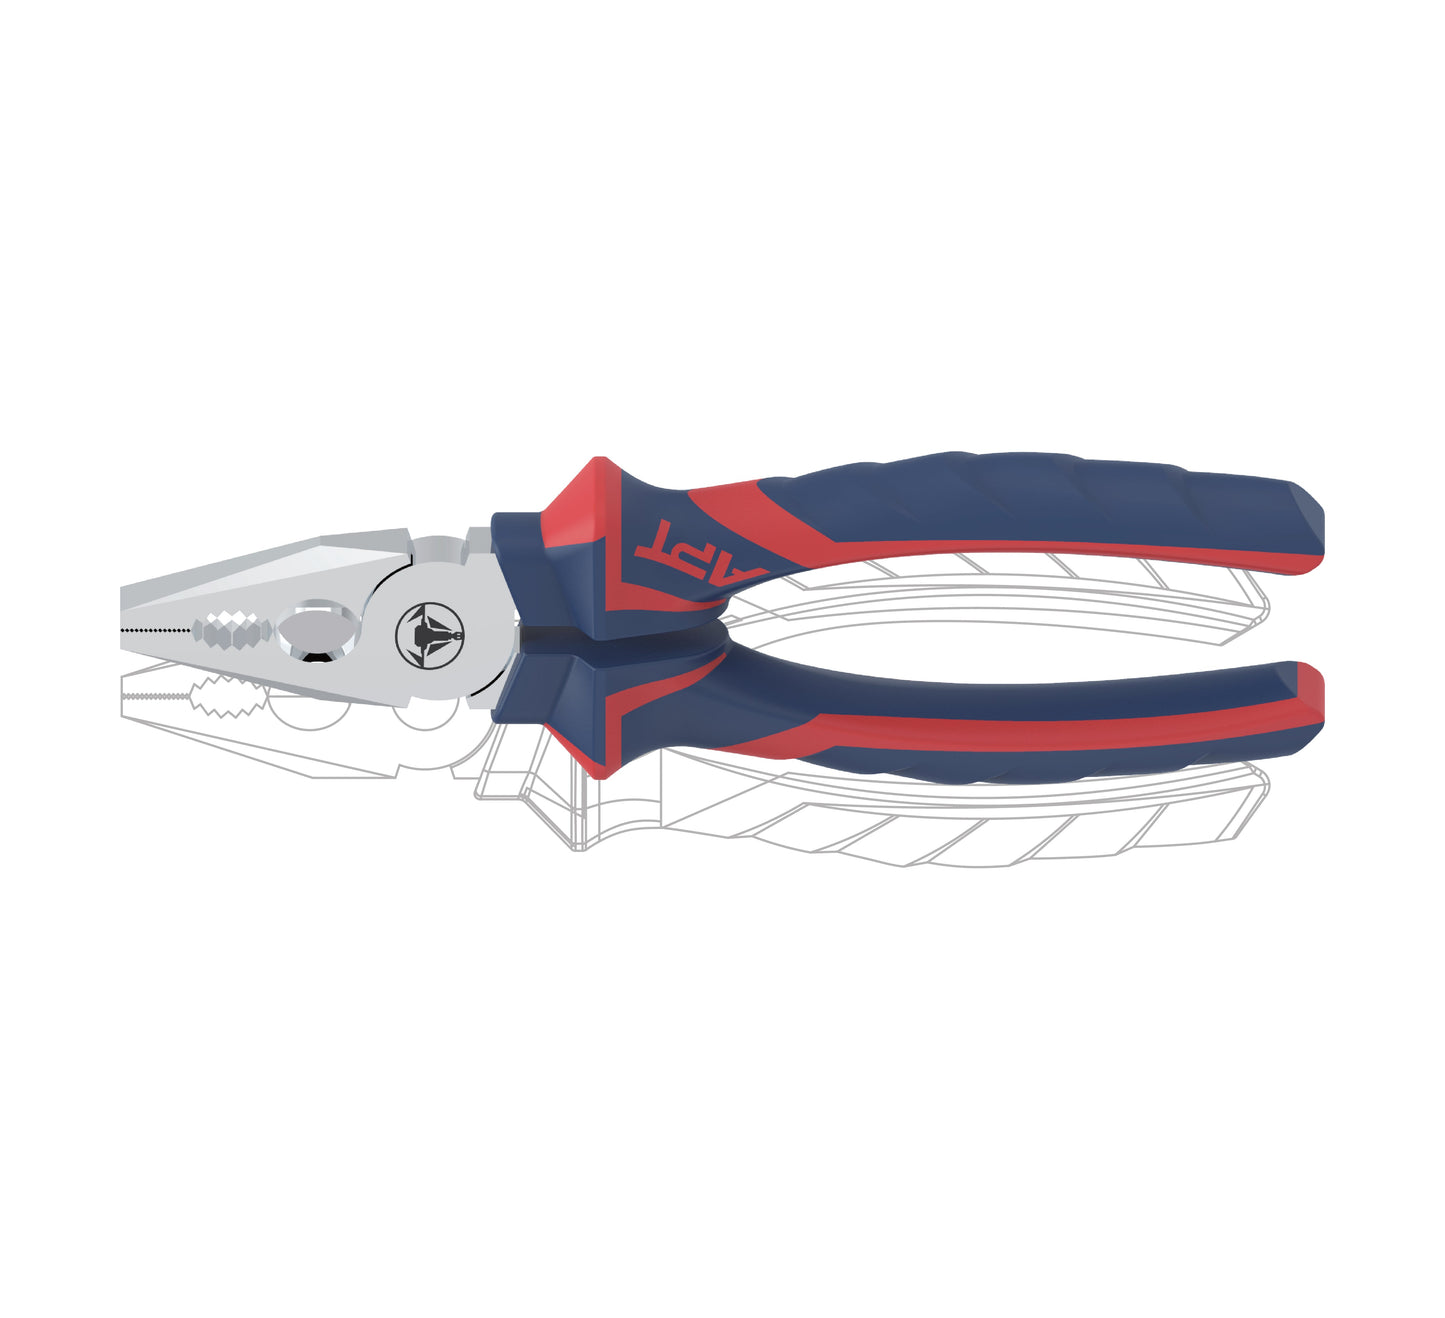 APT COMBINATION PLIER NEW APT 2 COLOR HANDLE PP CARD NICKEL PLATED 200MM-NEW APT PP CARD WITH RED STRAP AH1403540-200